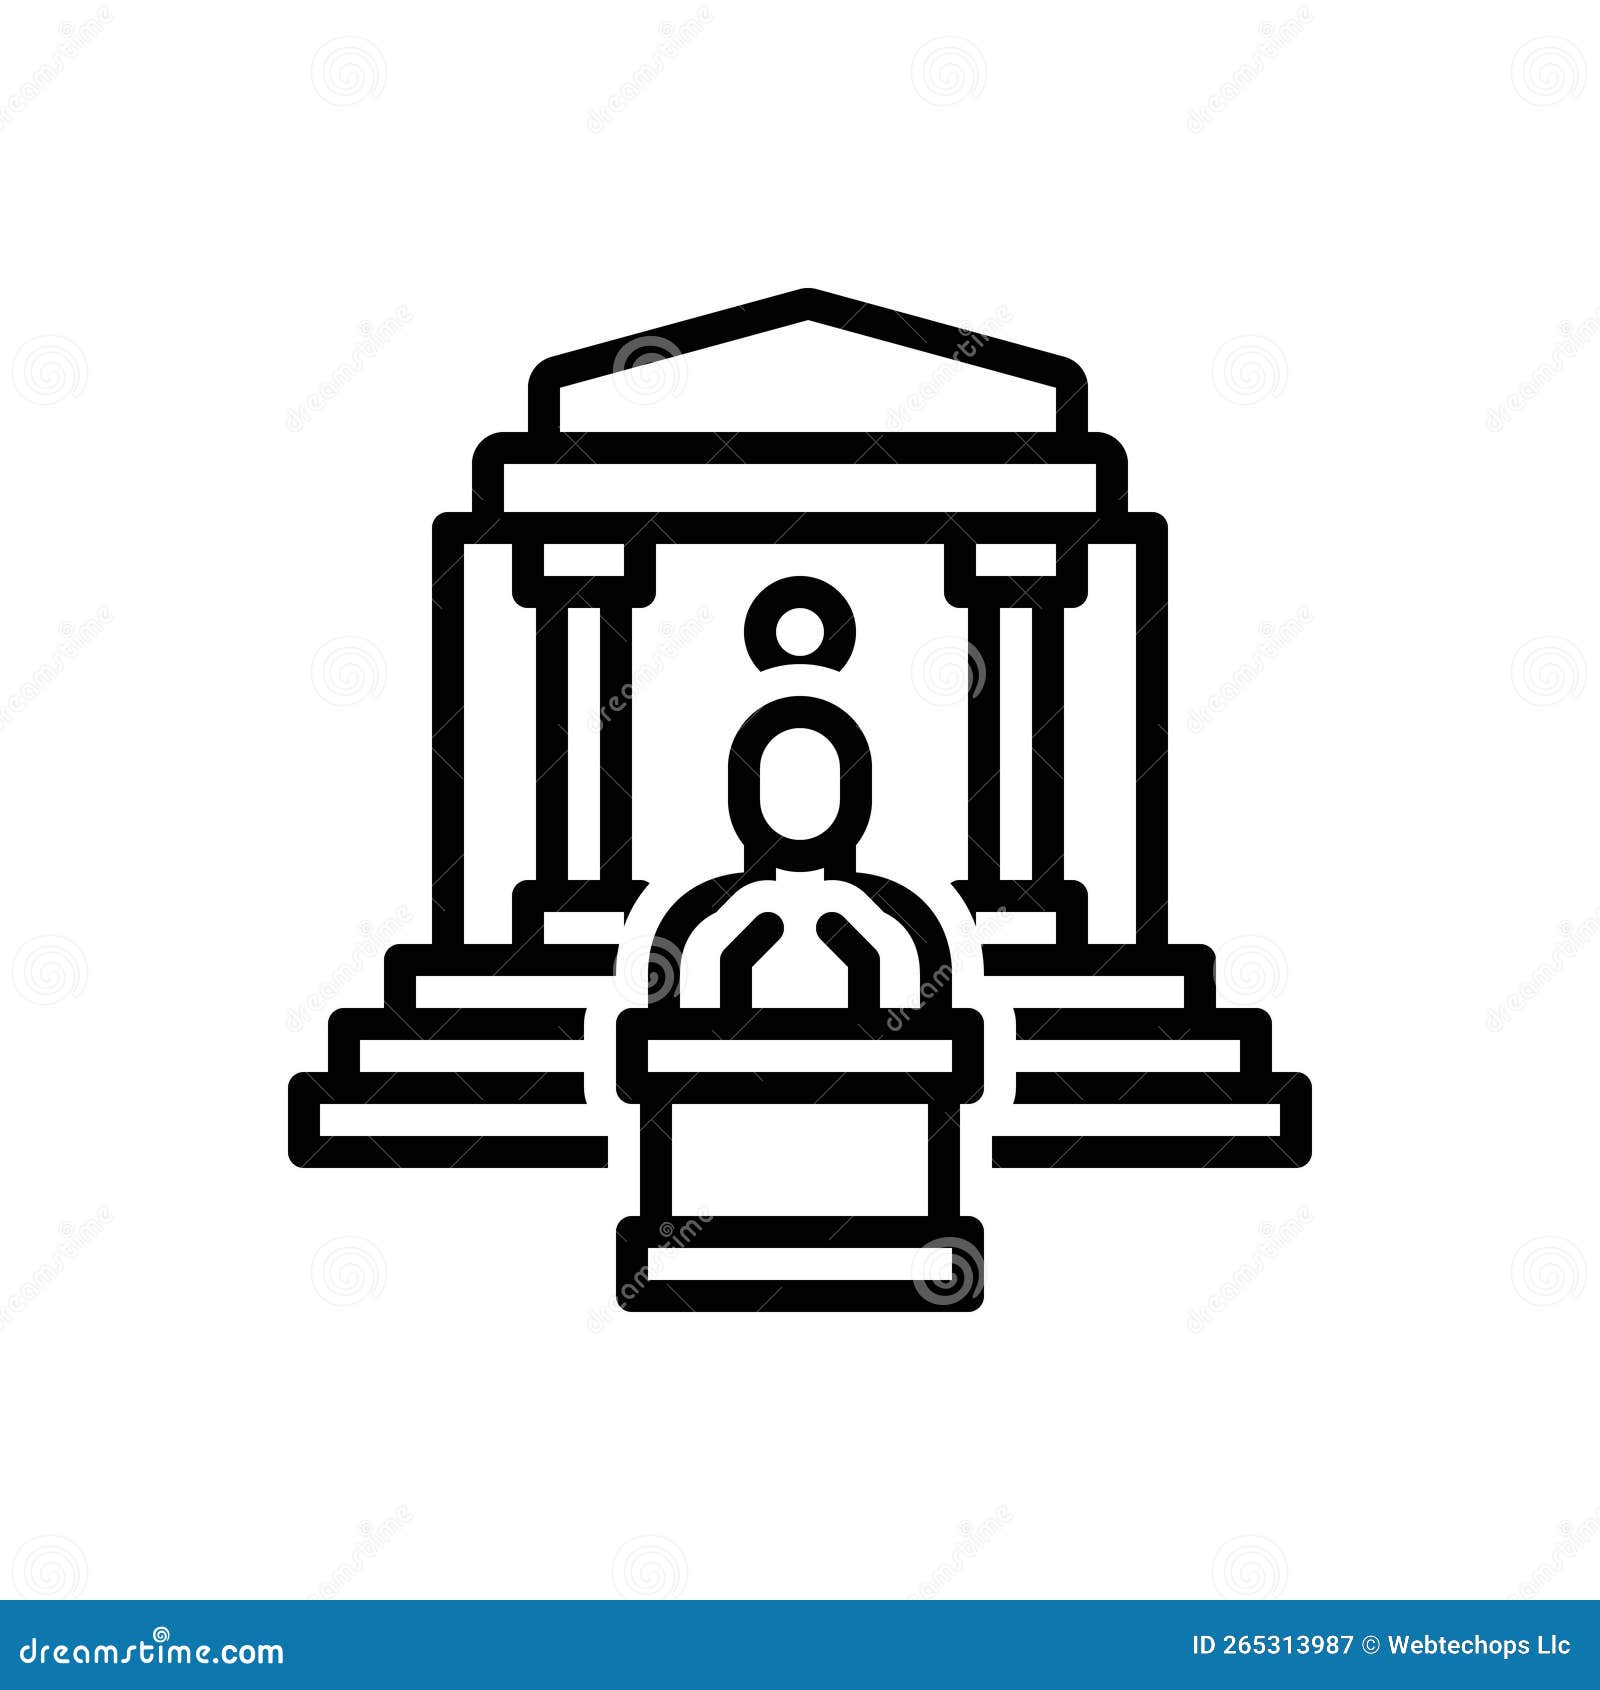 black line icon for governing, temple and law